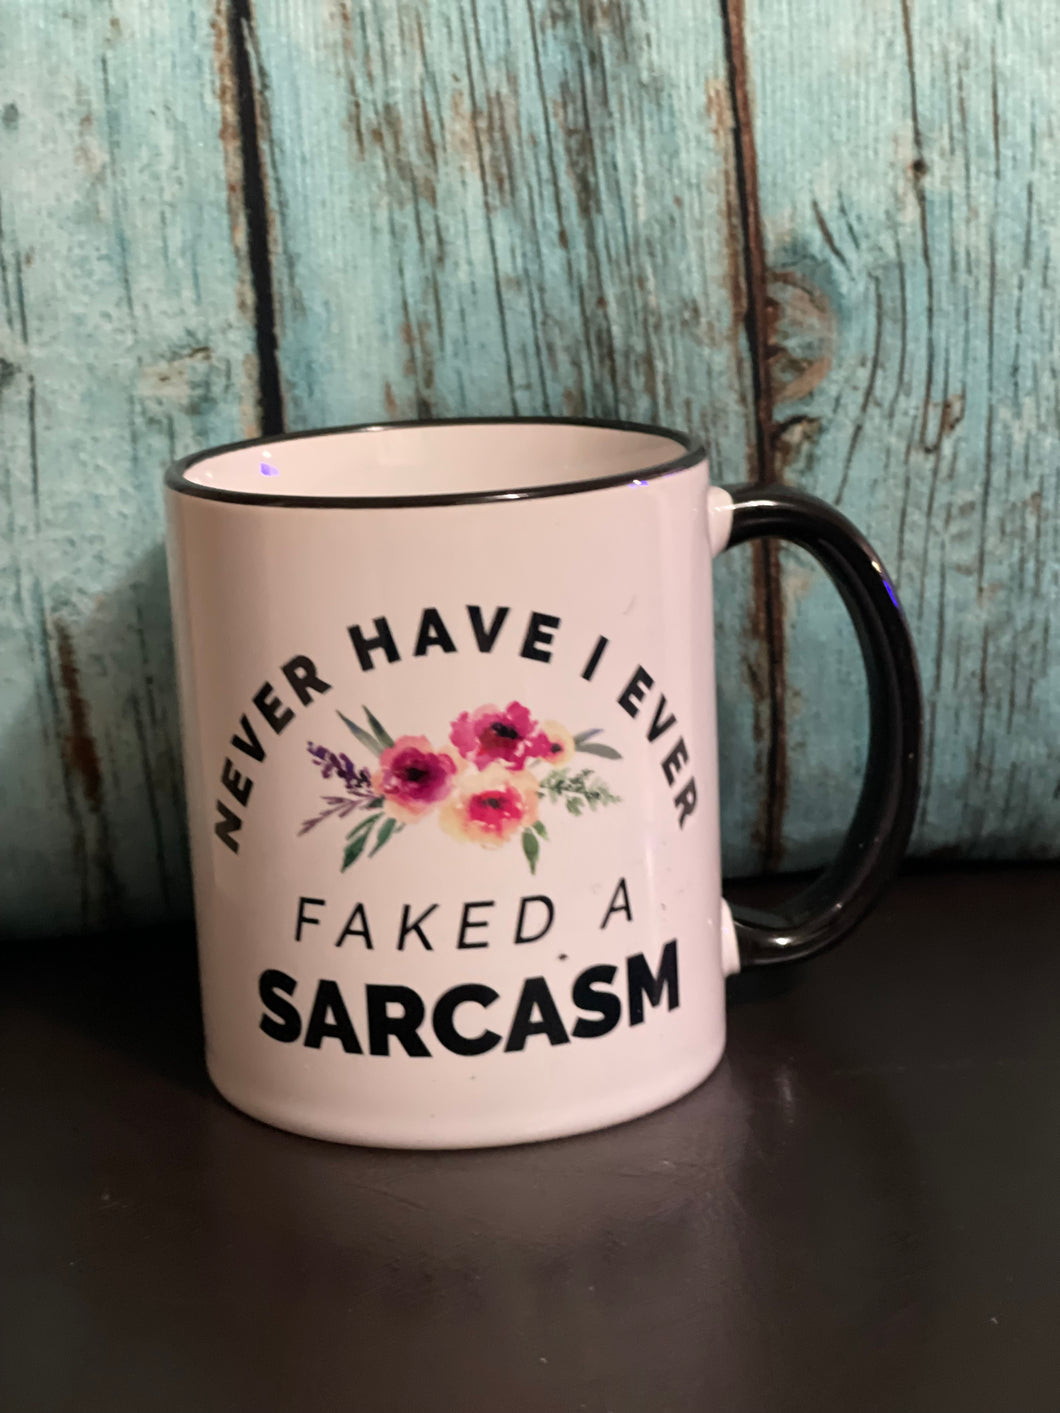 Faked a Sarcasm